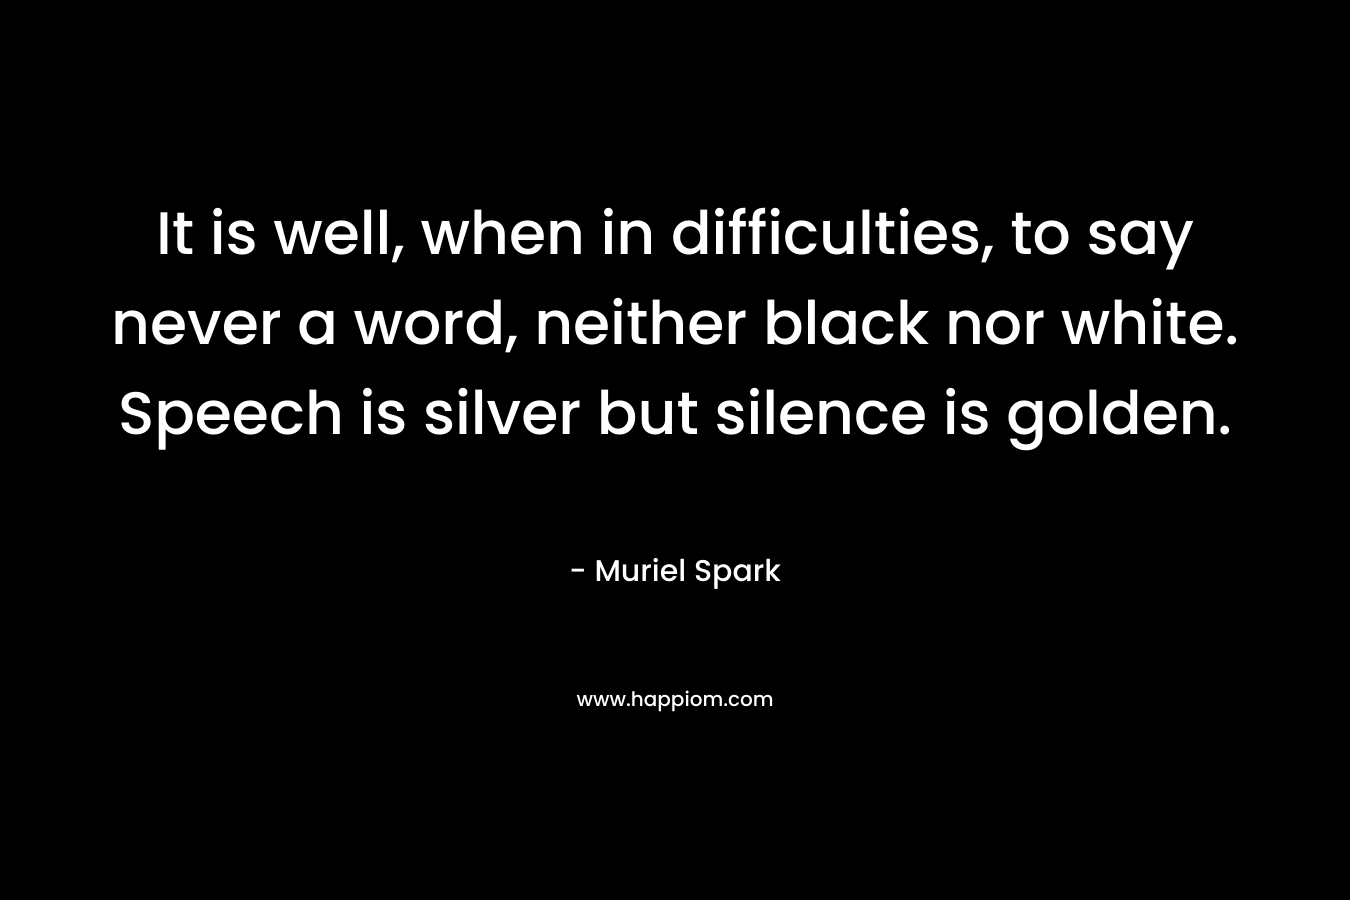 It is well, when in difficulties, to say never a word, neither black nor white. Speech is silver but silence is golden. – Muriel Spark